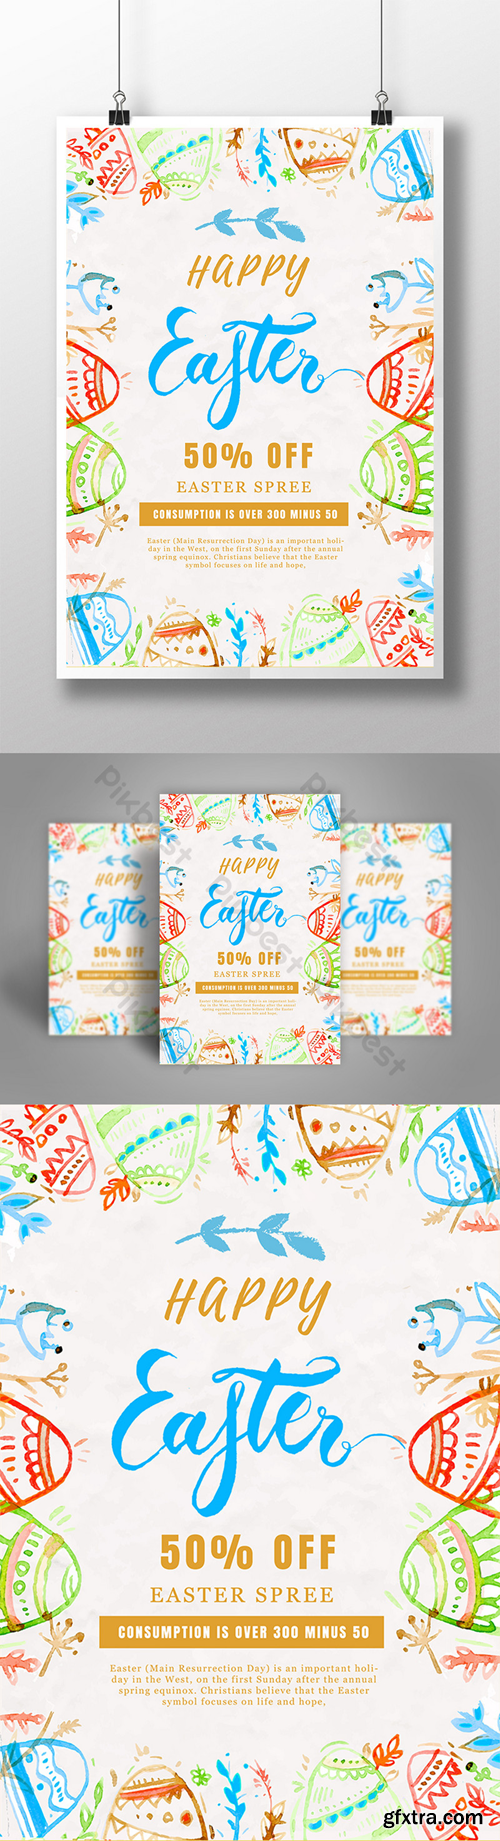 Fashion Easter Promotion Poster   Template PSD